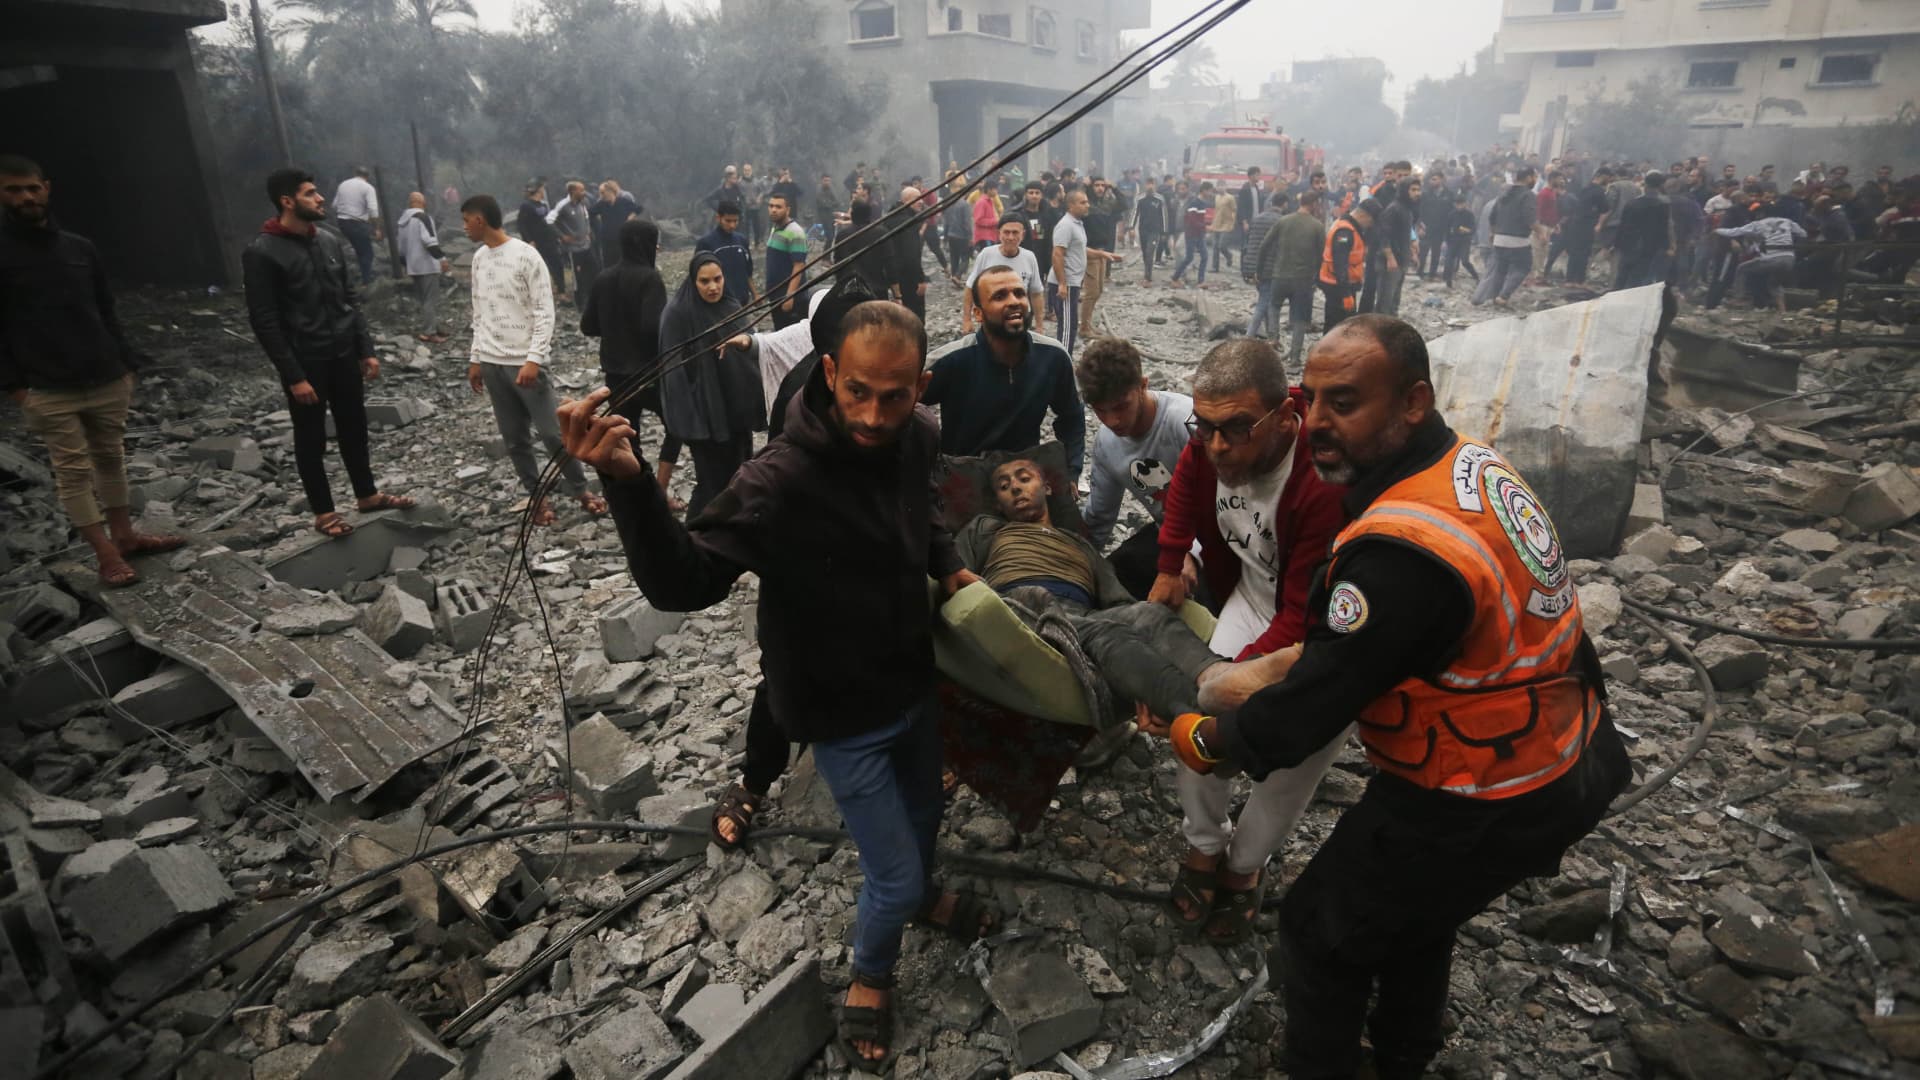 An injured person is pulled out among the rubble as civil defense team and residents extinguish the fire and conduct a search and rescue operation among the rubbles of the buildings following an Israeli attack in Deir al-Balah, Gaza on December 05, 2023. (Photo by Ashraf Amra/Anadolu via Getty Images)